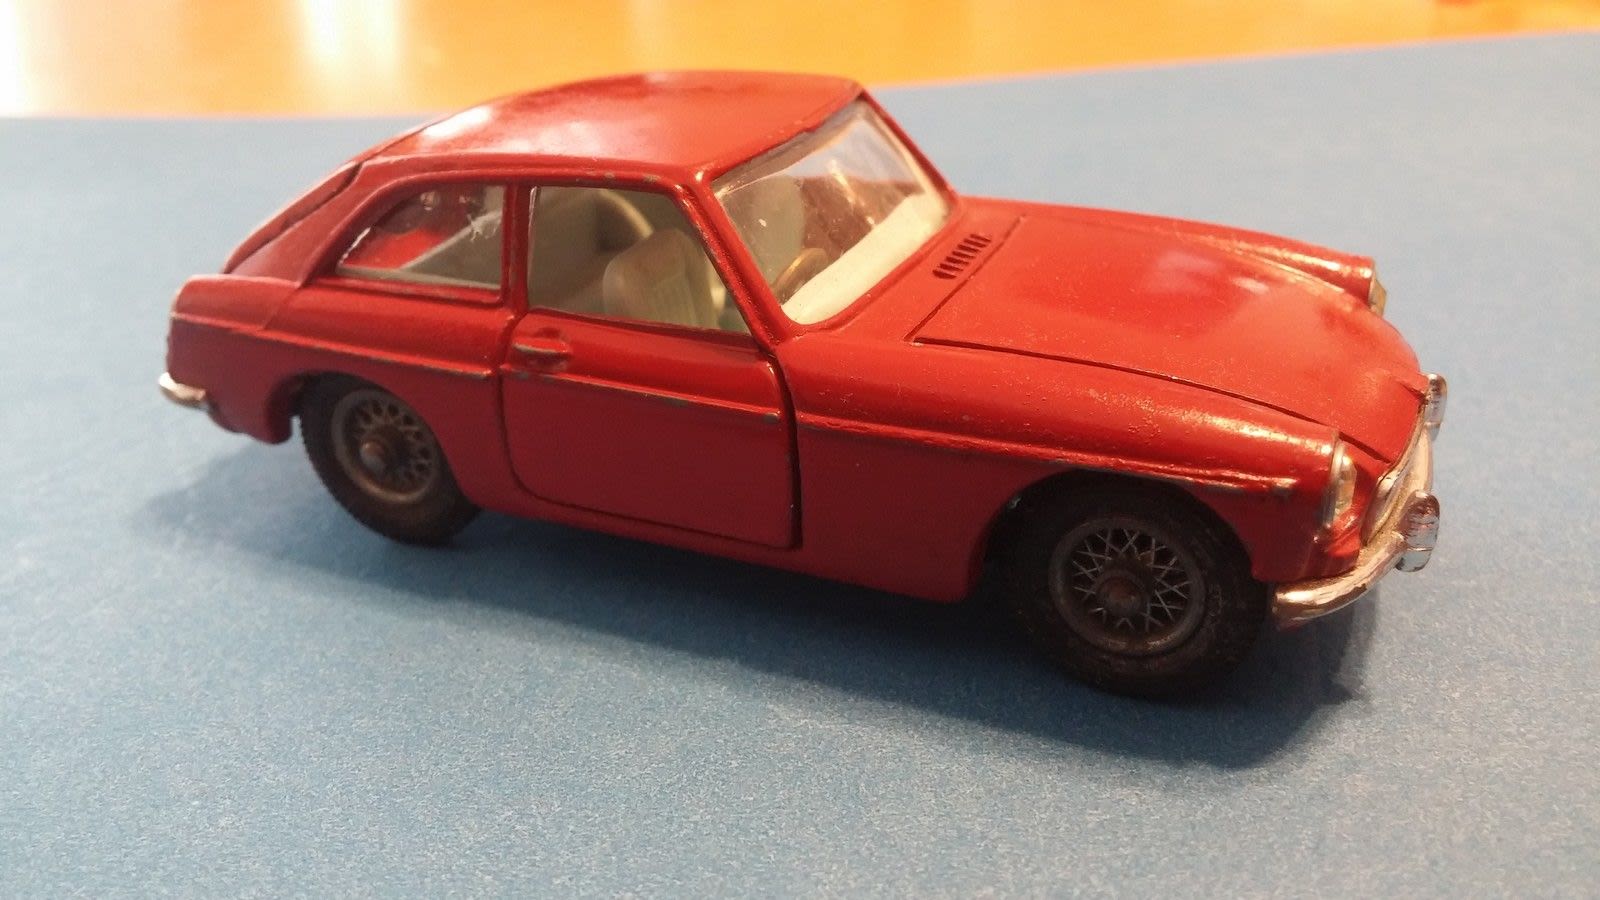 Illustration for article titled For $35, is this Corgi MGB GT worth it?